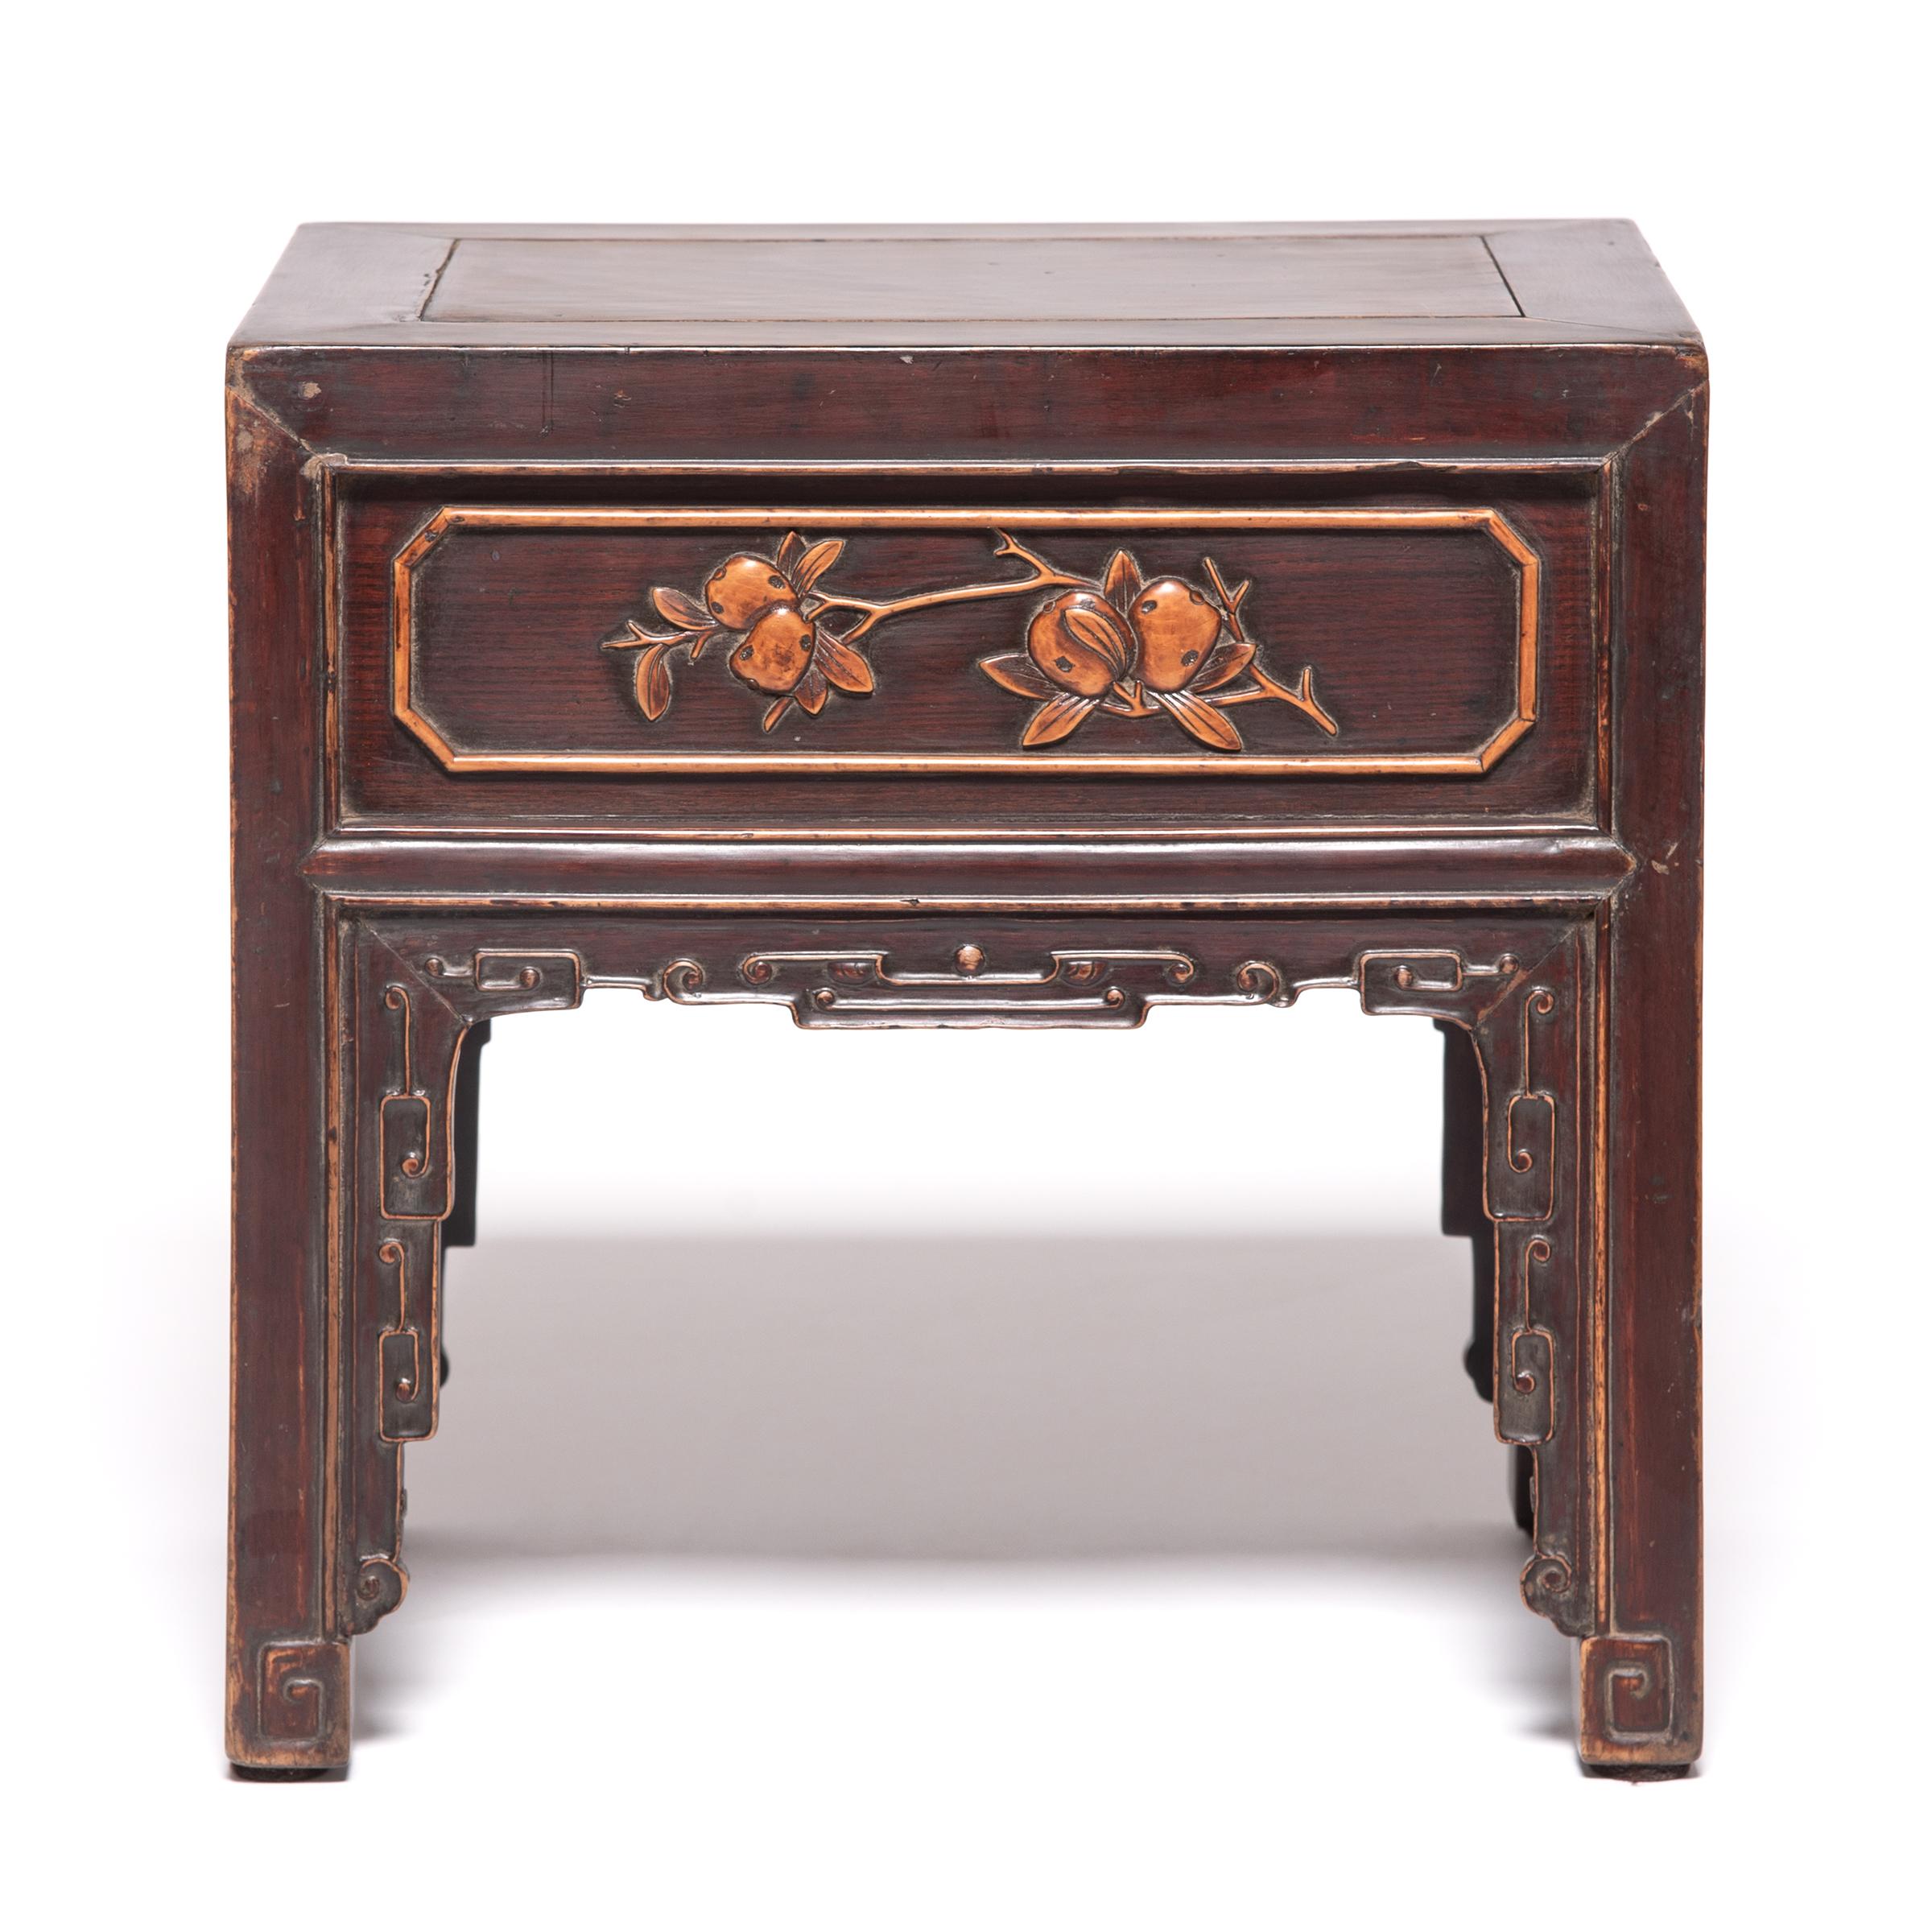 Created by a Qing-dynasty artisan over 150 years ago, these petite tables with boxwood inlay of auspicious fruit and floral arrangements were likely used as display stands for figures, vases, and other precious objects. Appreciated for its smooth